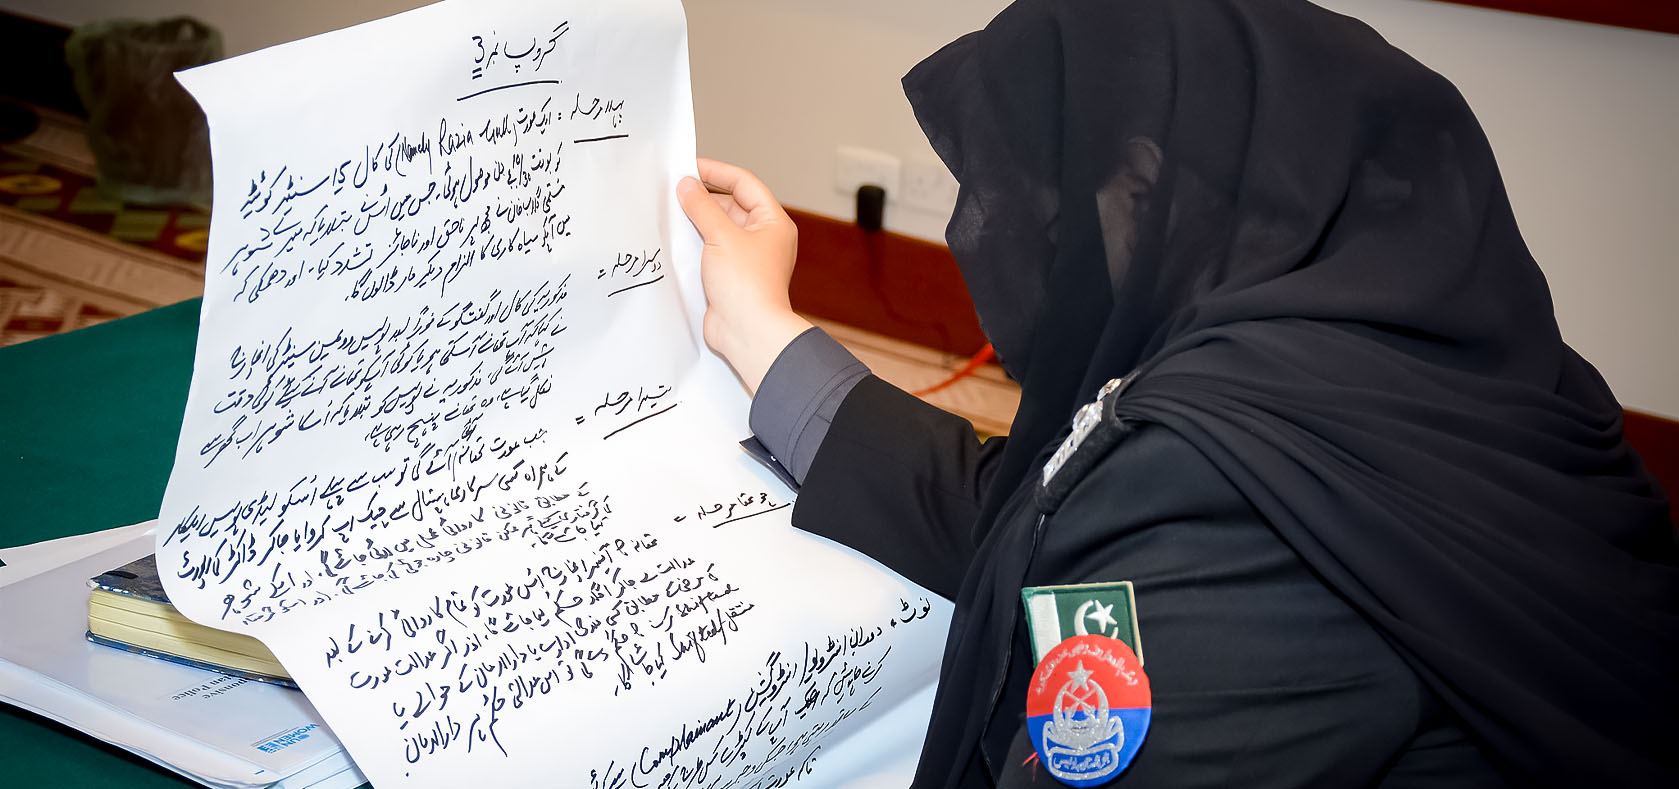 A lady police officer being train on women friendly reporting, and without stigmatizes victims of violence in Quetta, Balochistan. Photo: UN Women